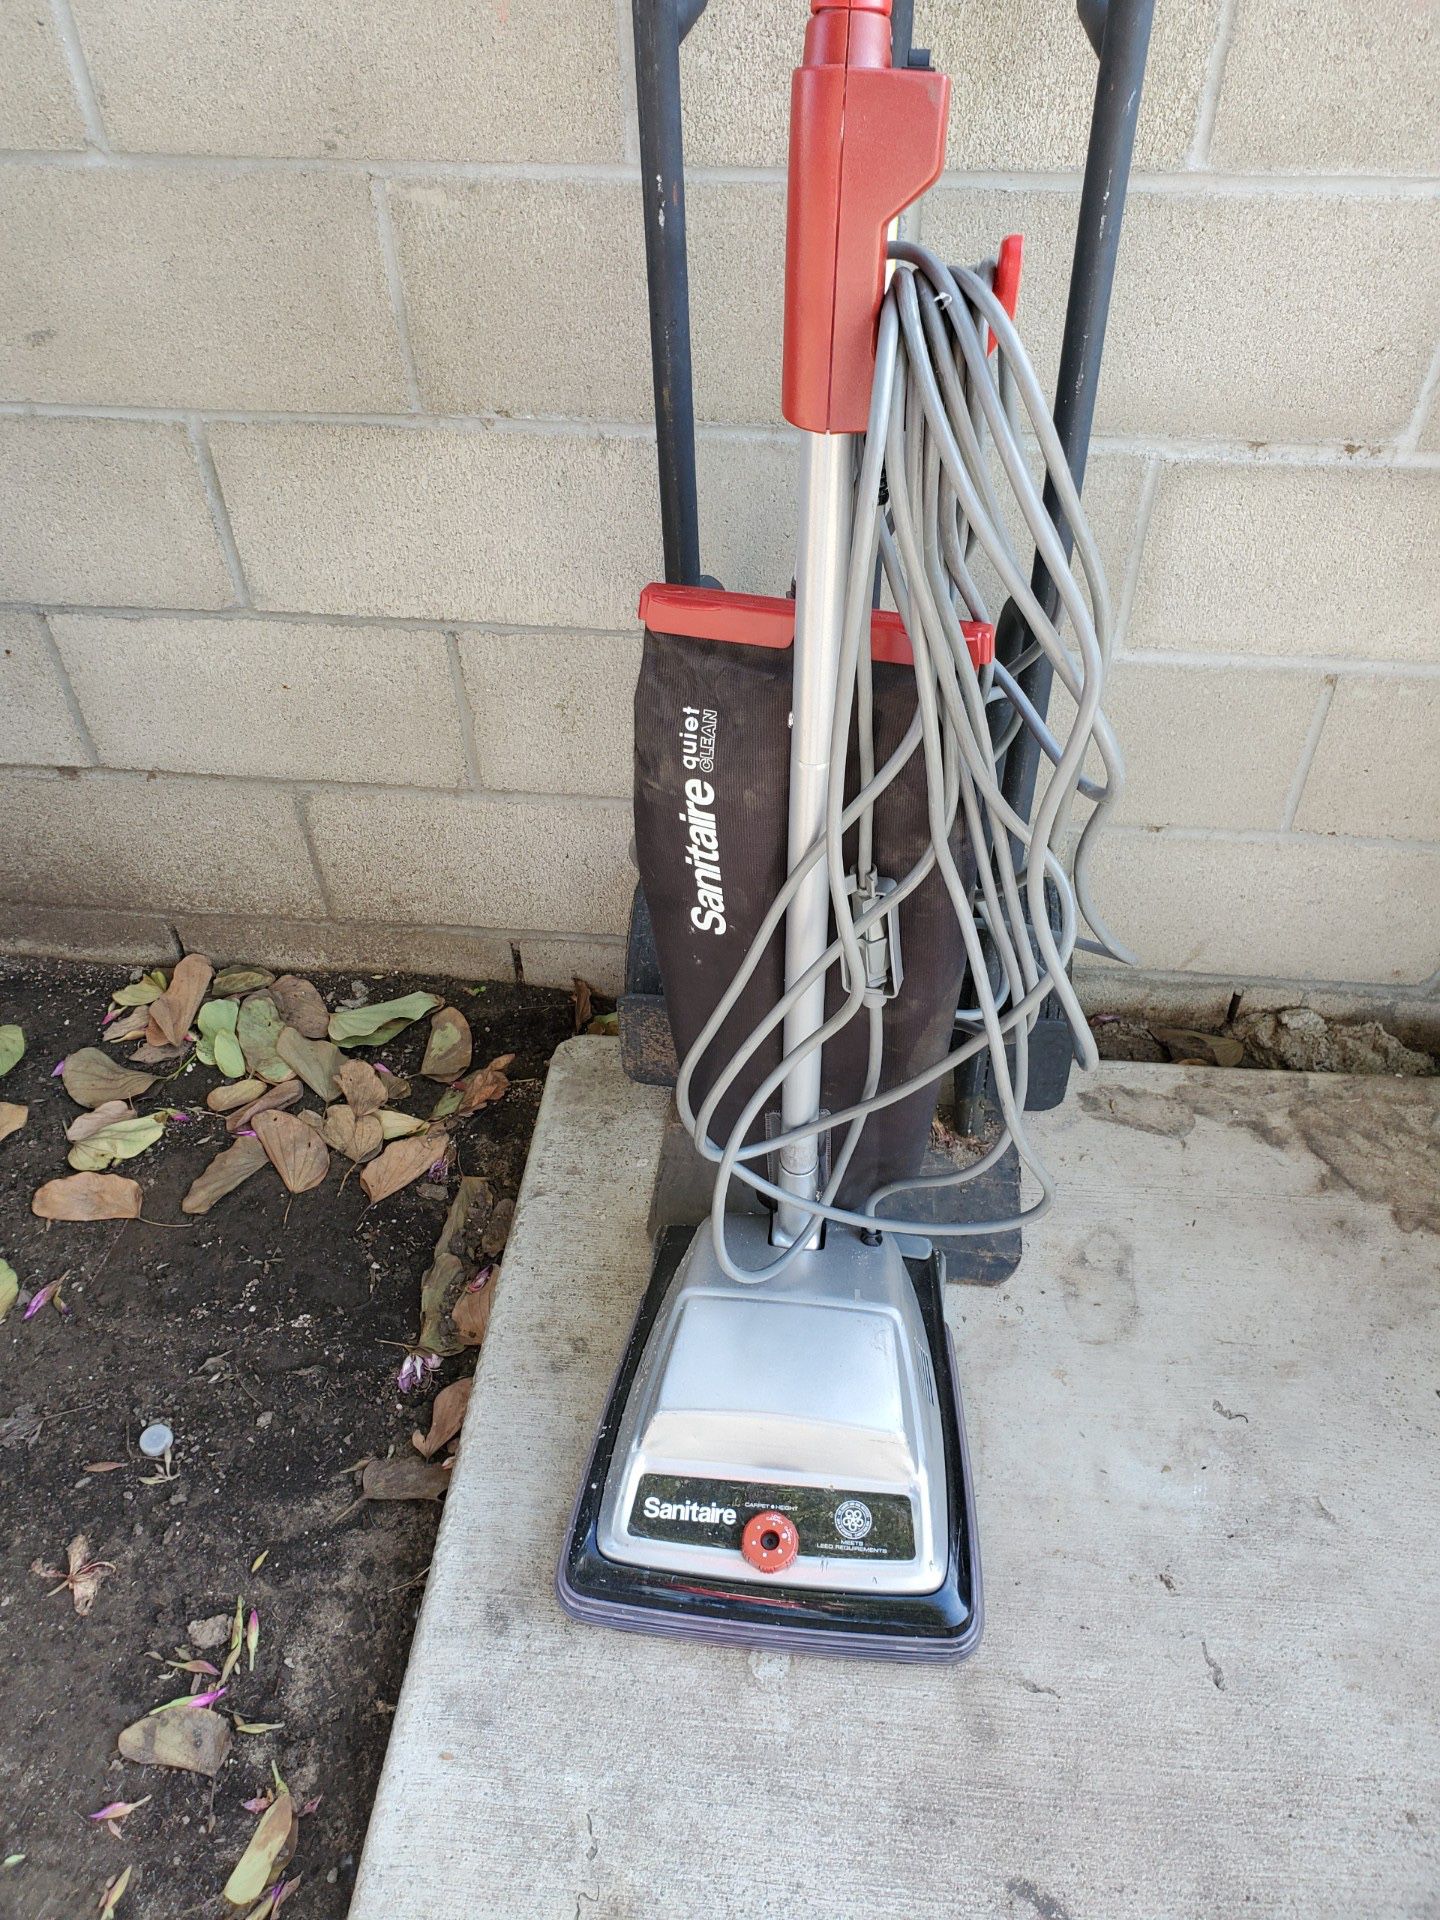 sanitaire commercial vacuum used works like new